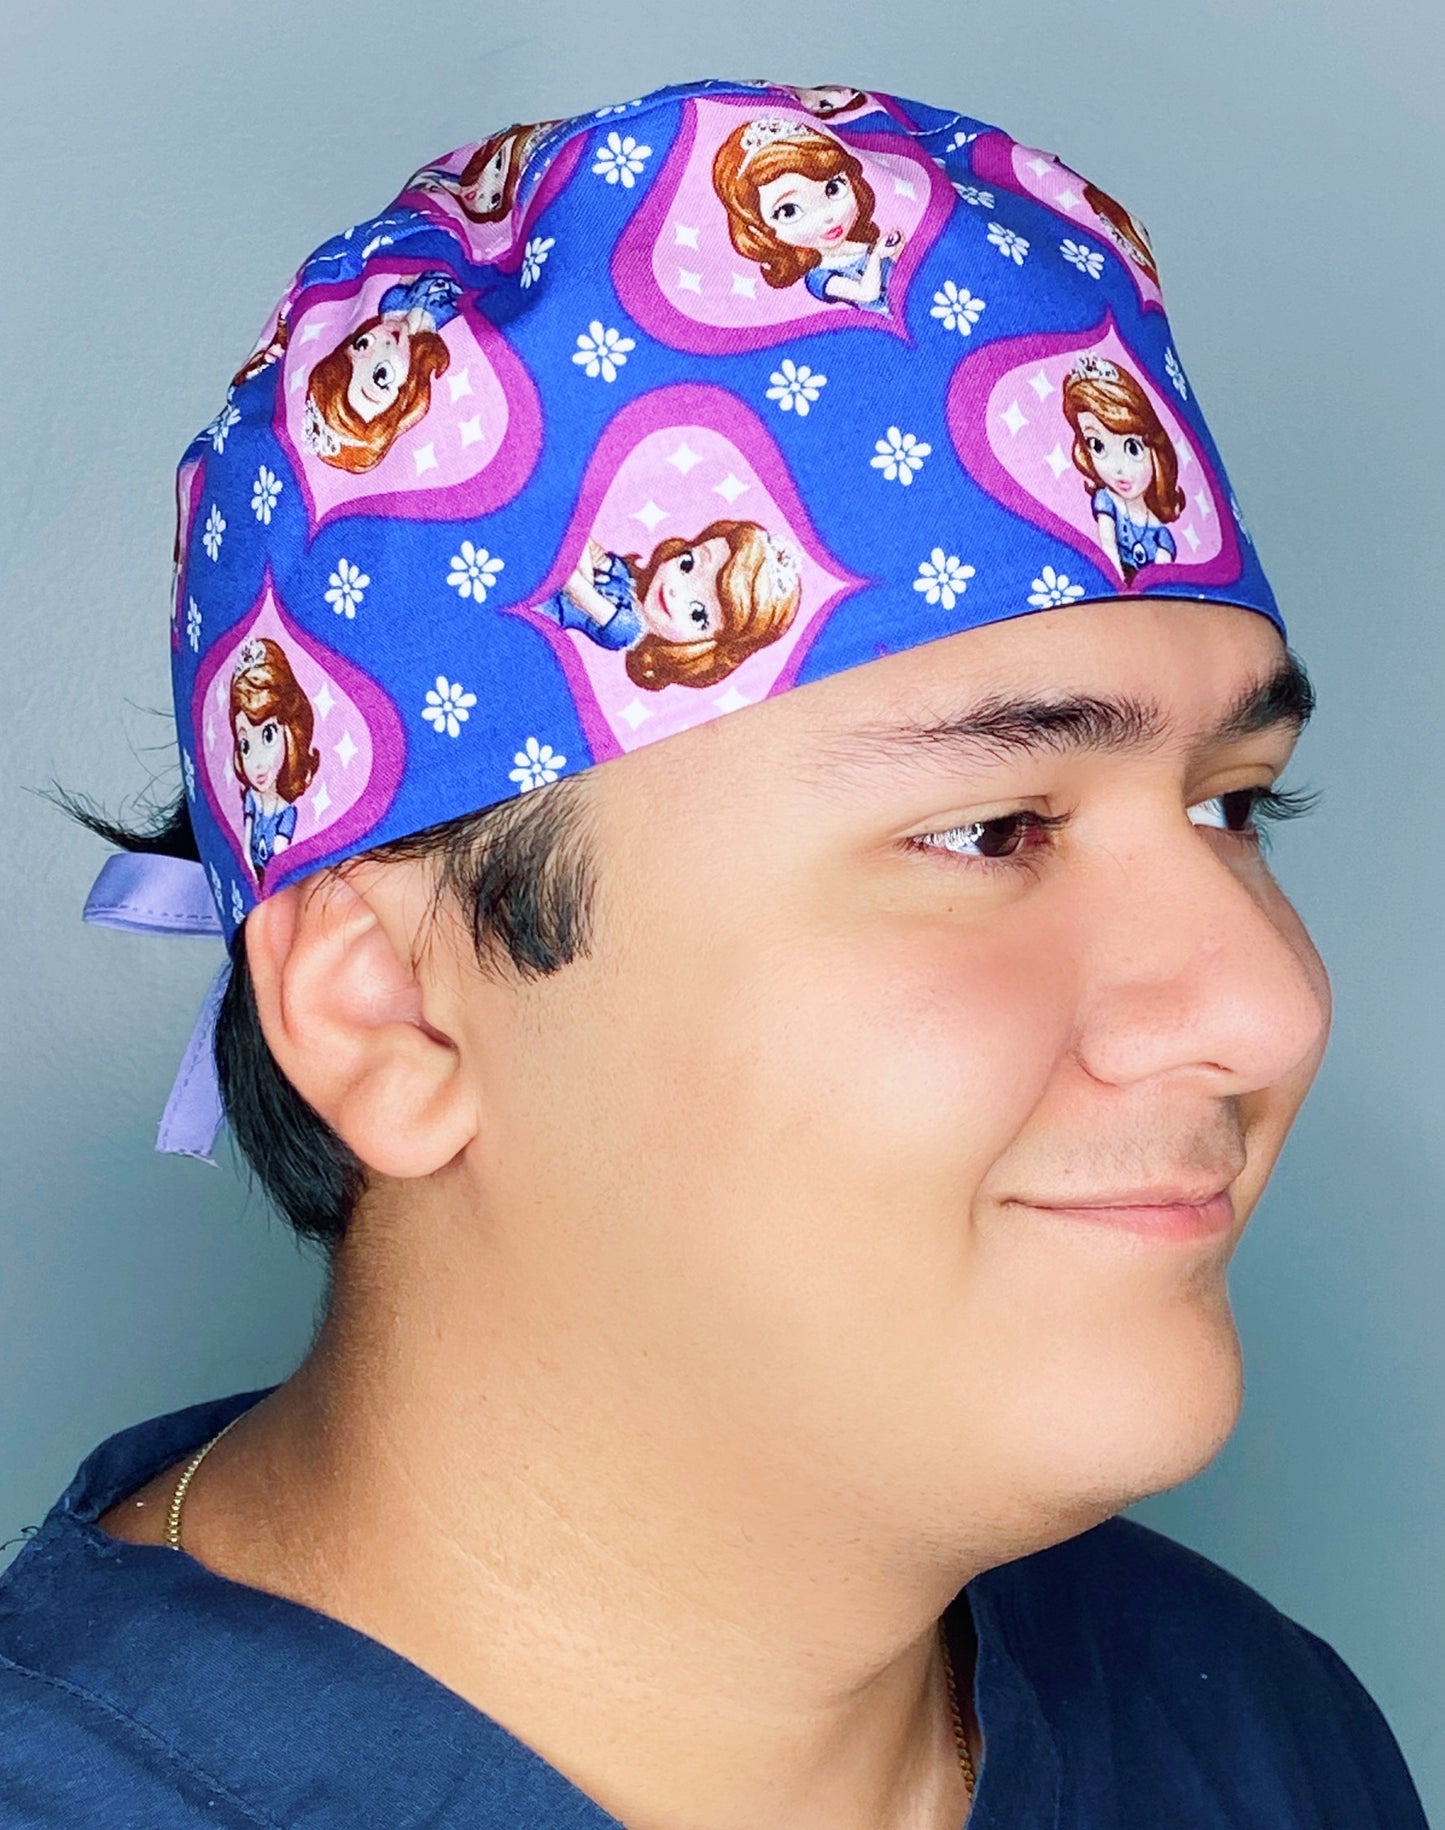 Sofia the First Famous Movie Character Unisex Geek Scrub Cap